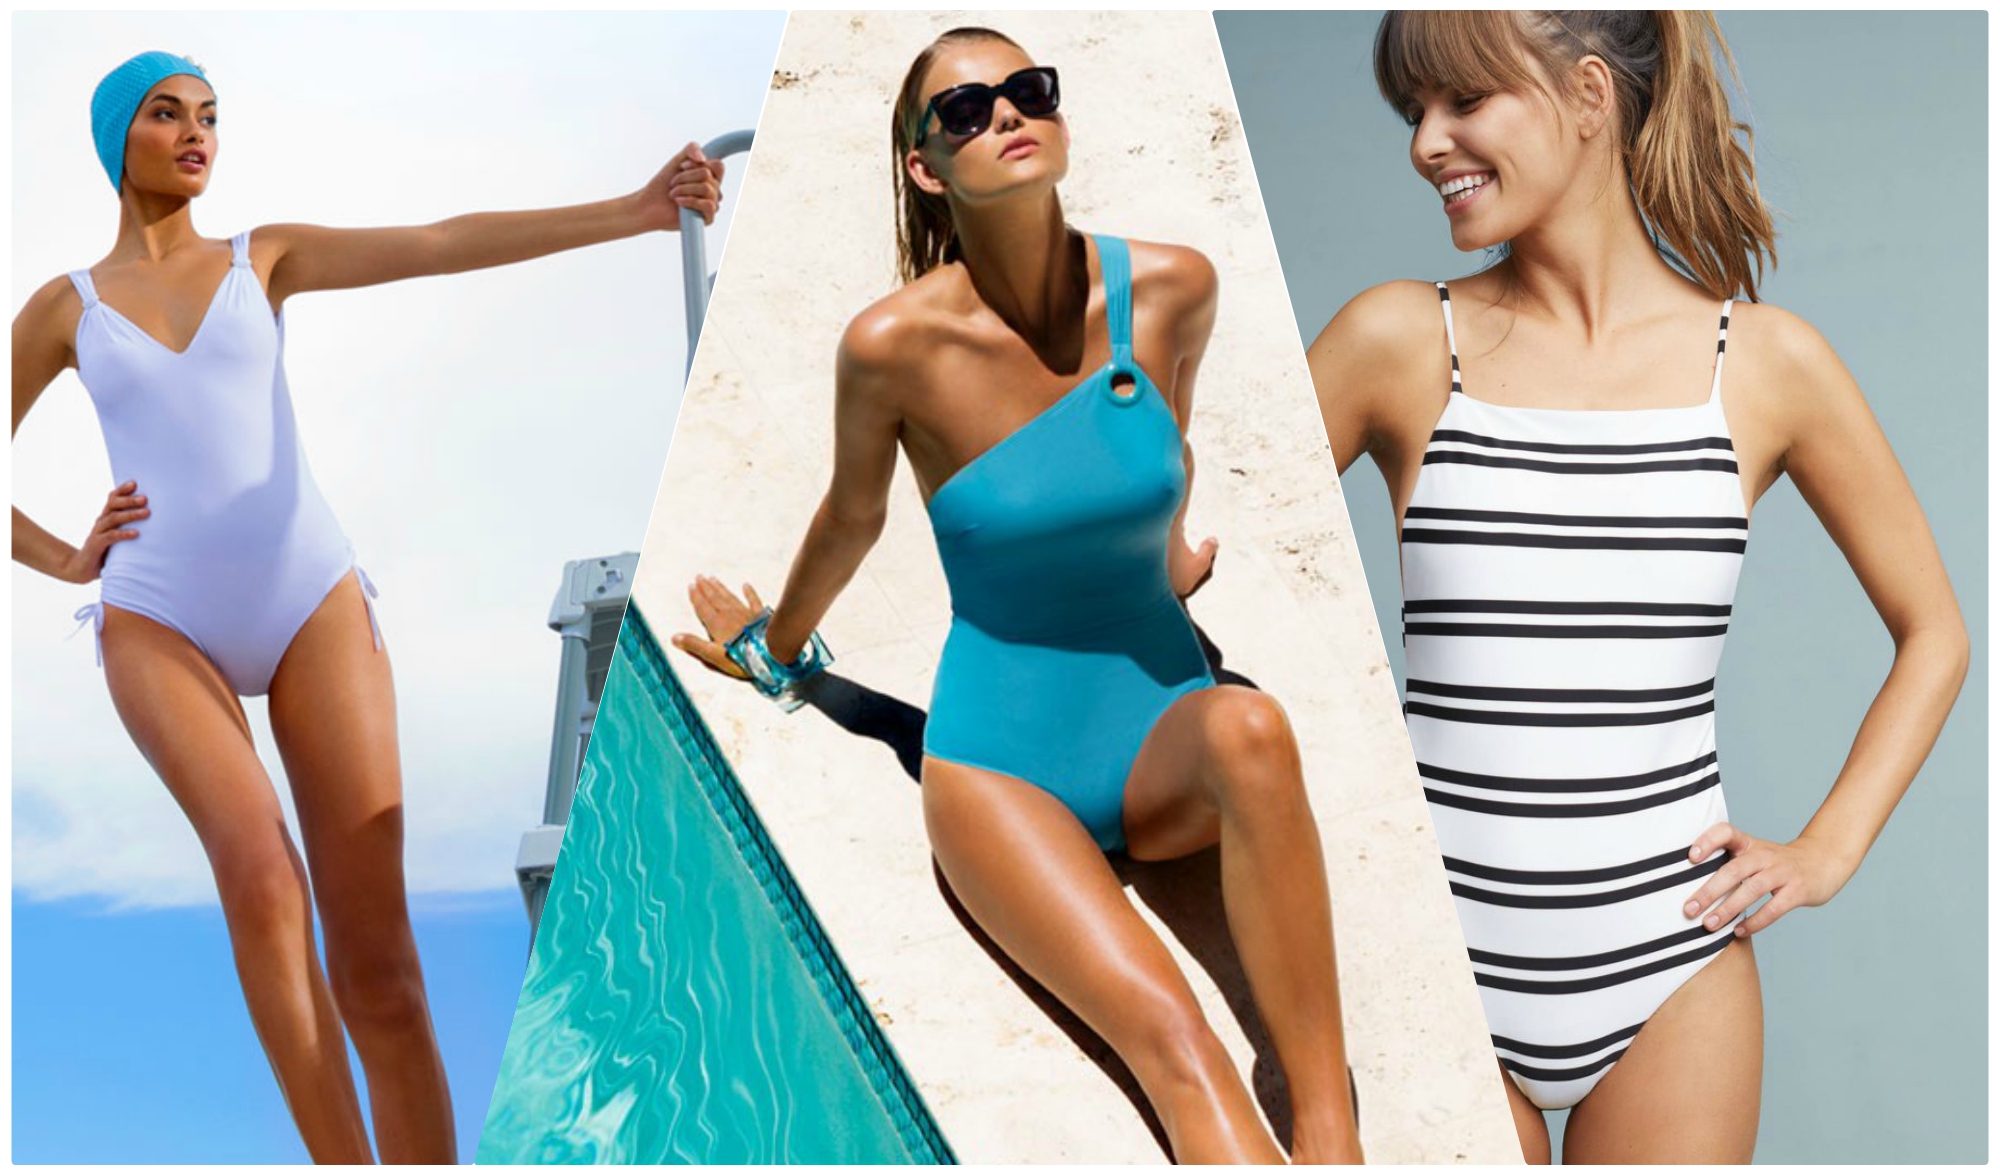 The Most Iconic Swimwear Brands6